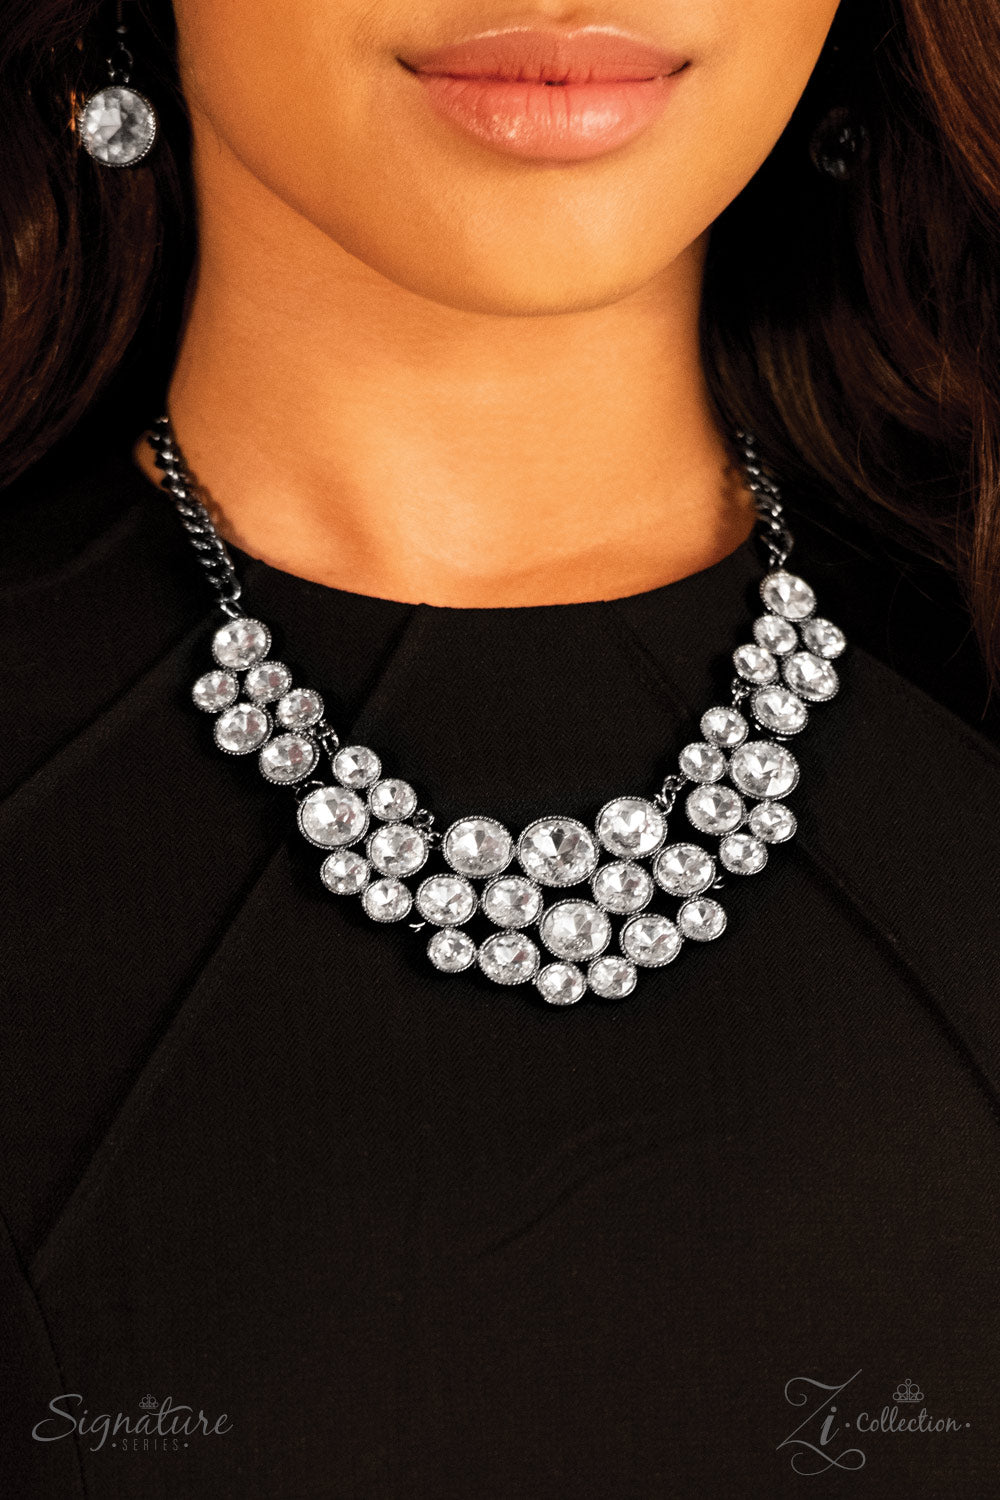 The Angela-Zi Collection Necklace